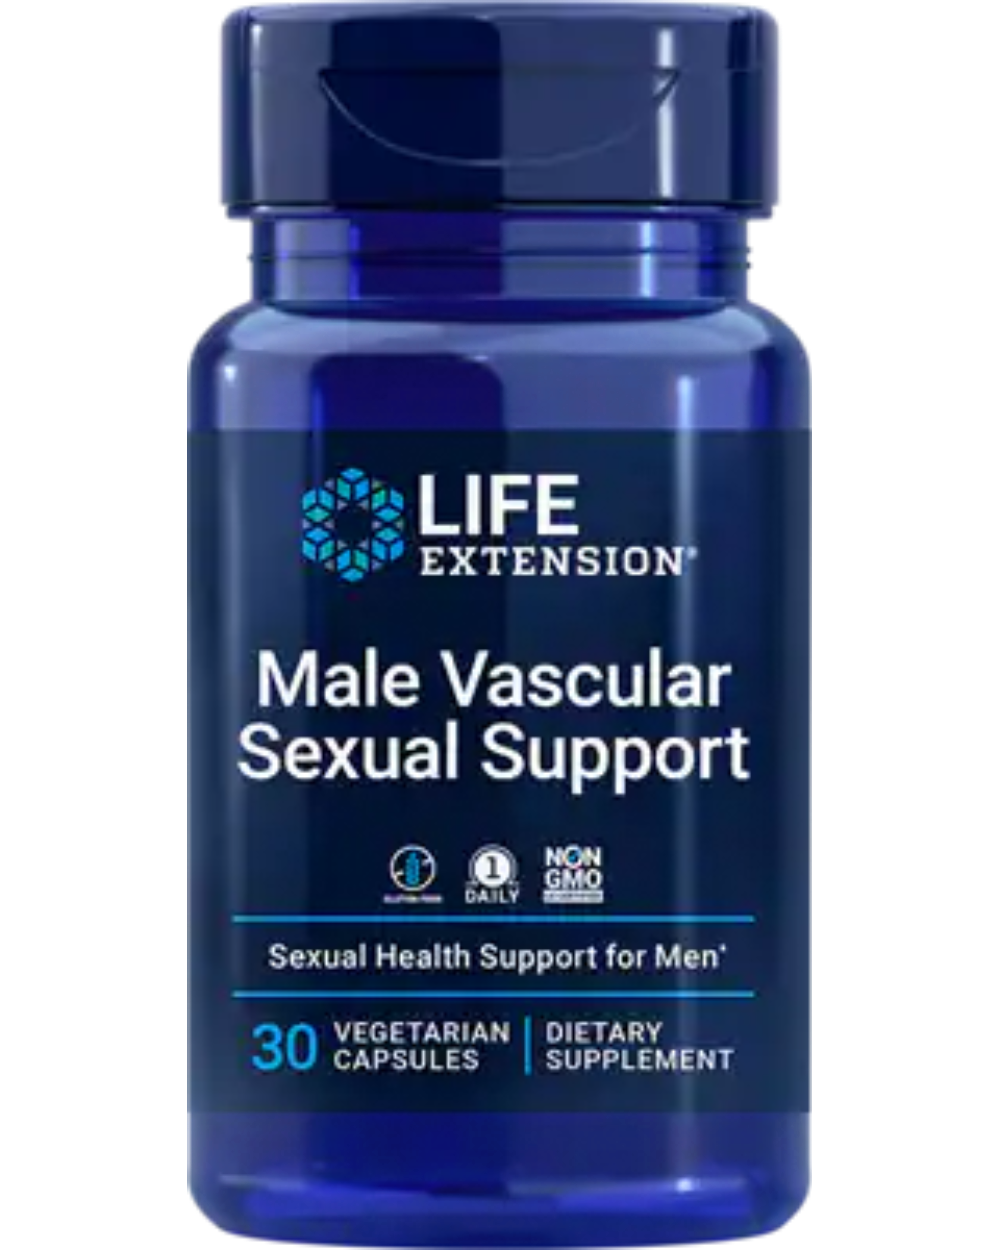 Male Vascular Sexual Support